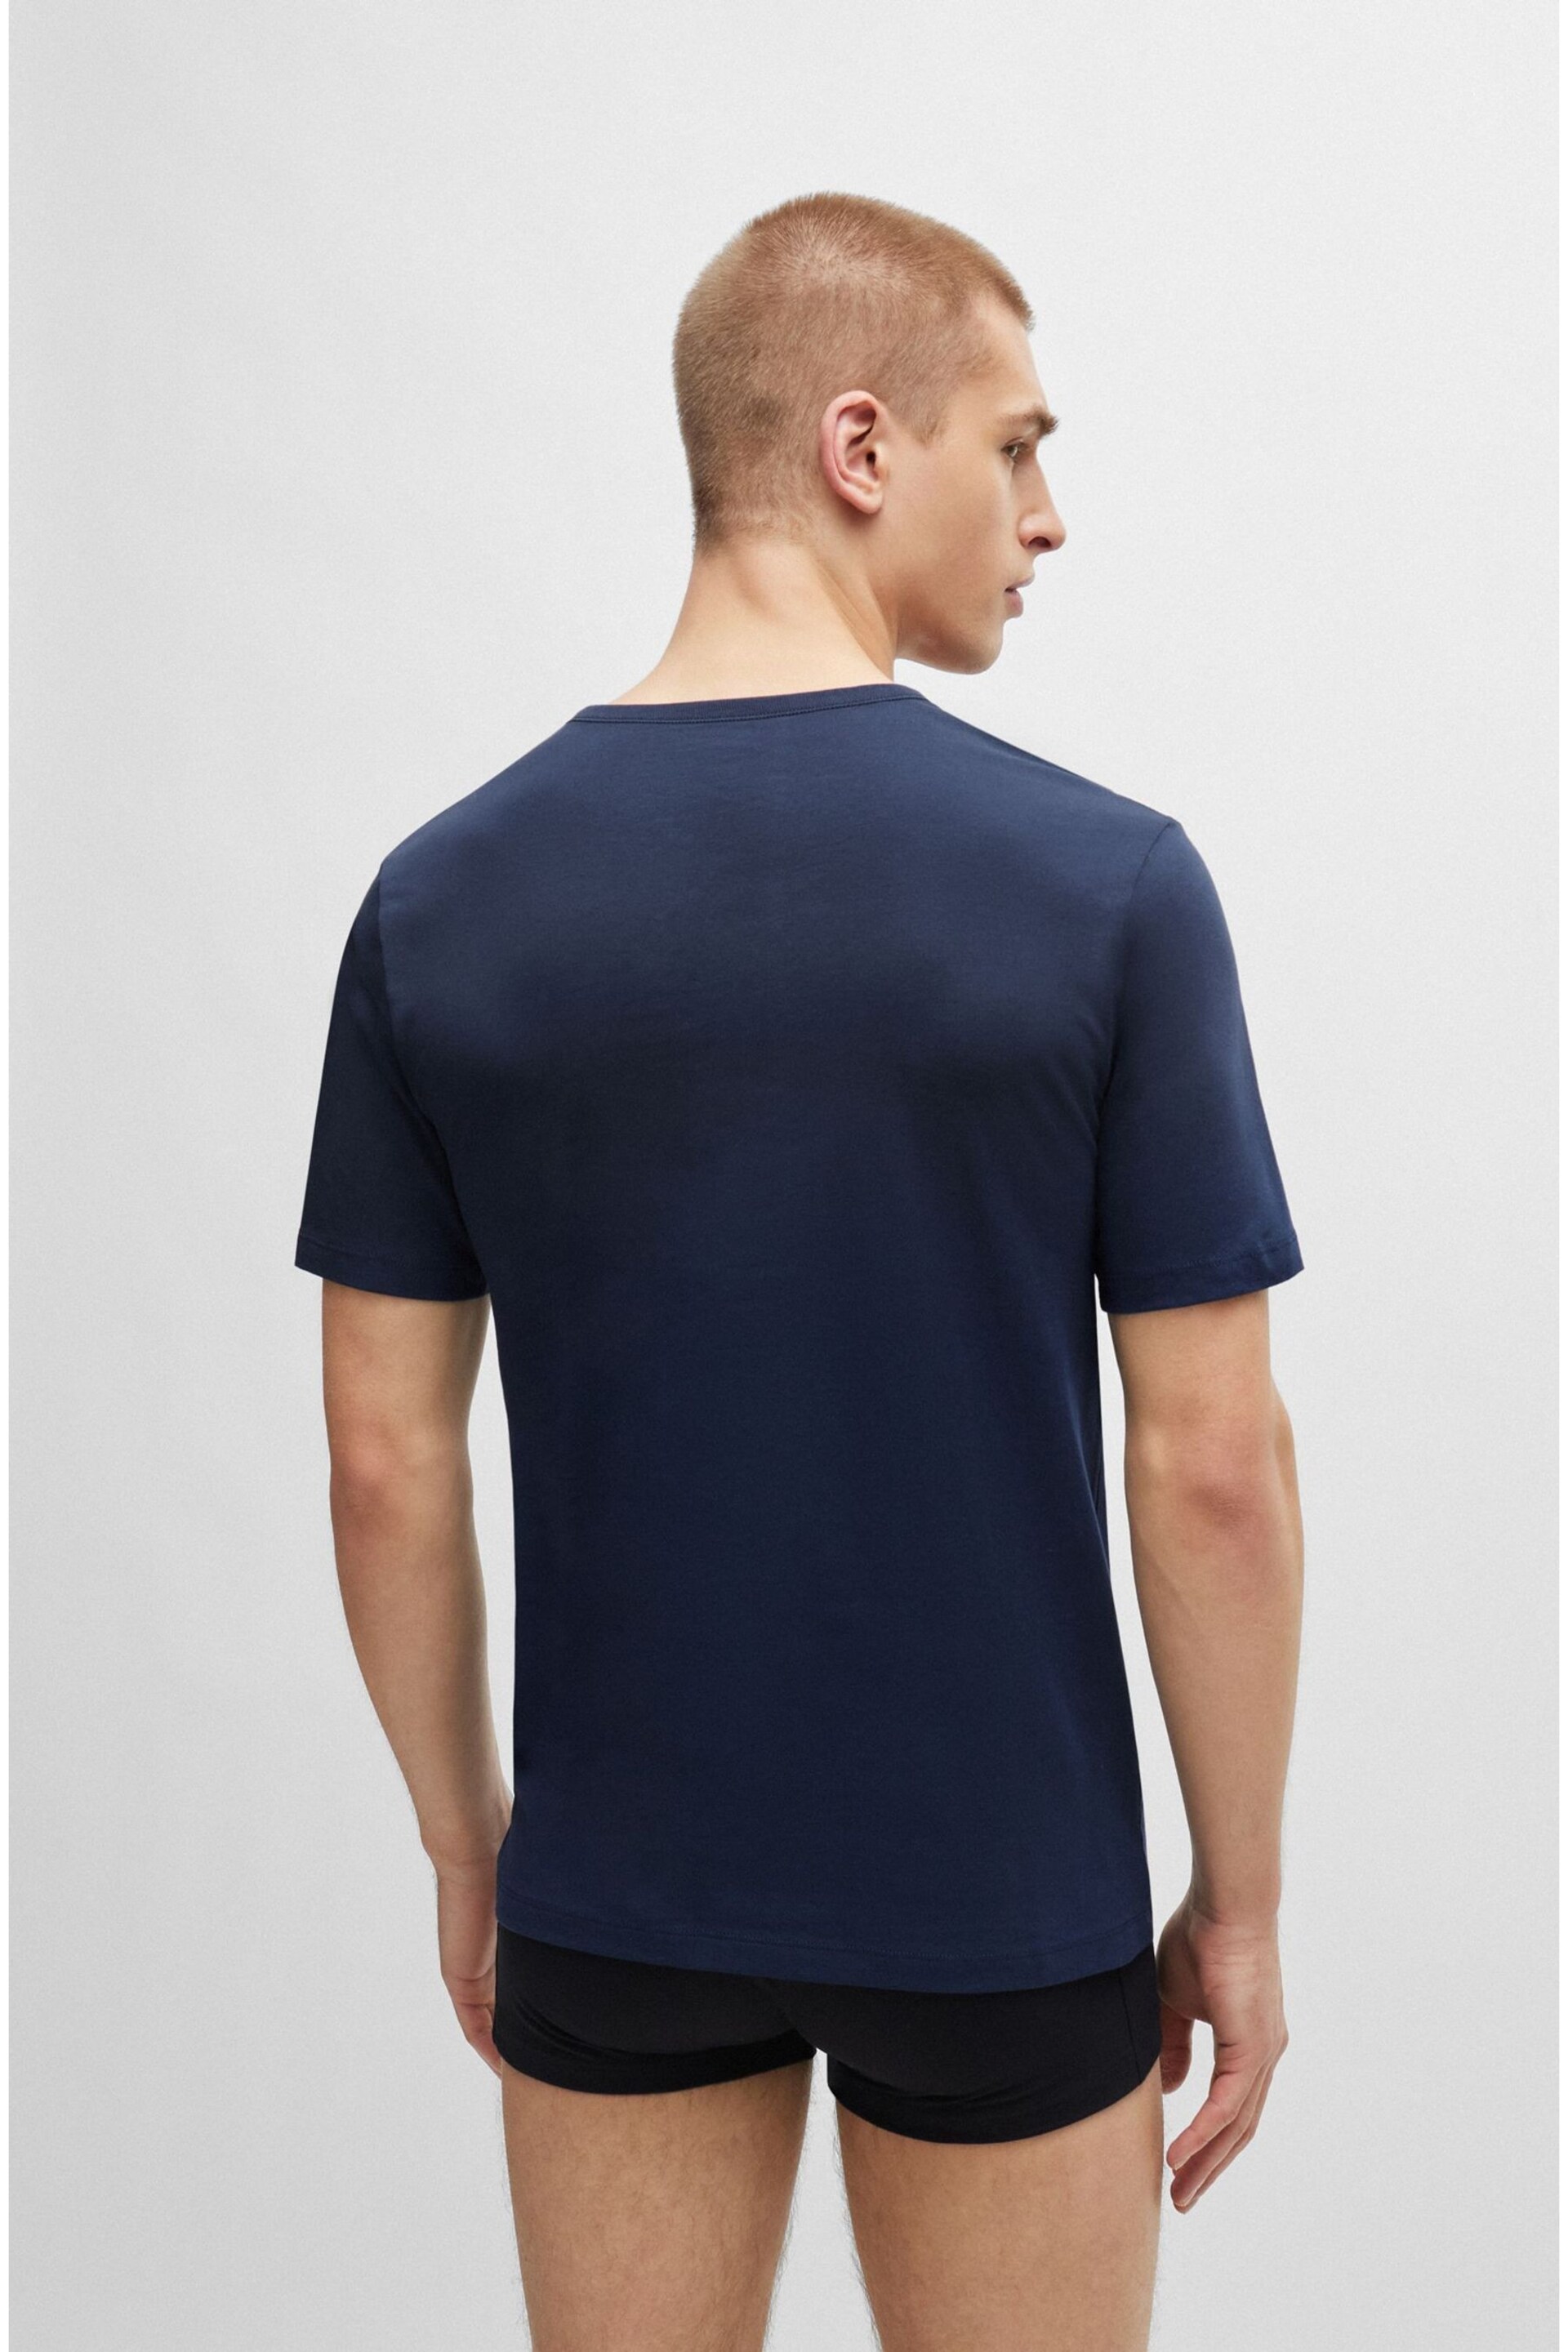 BOSS Blue V-Neck Cotton Jersey T-Shirts 3 Pack - Image 7 of 9